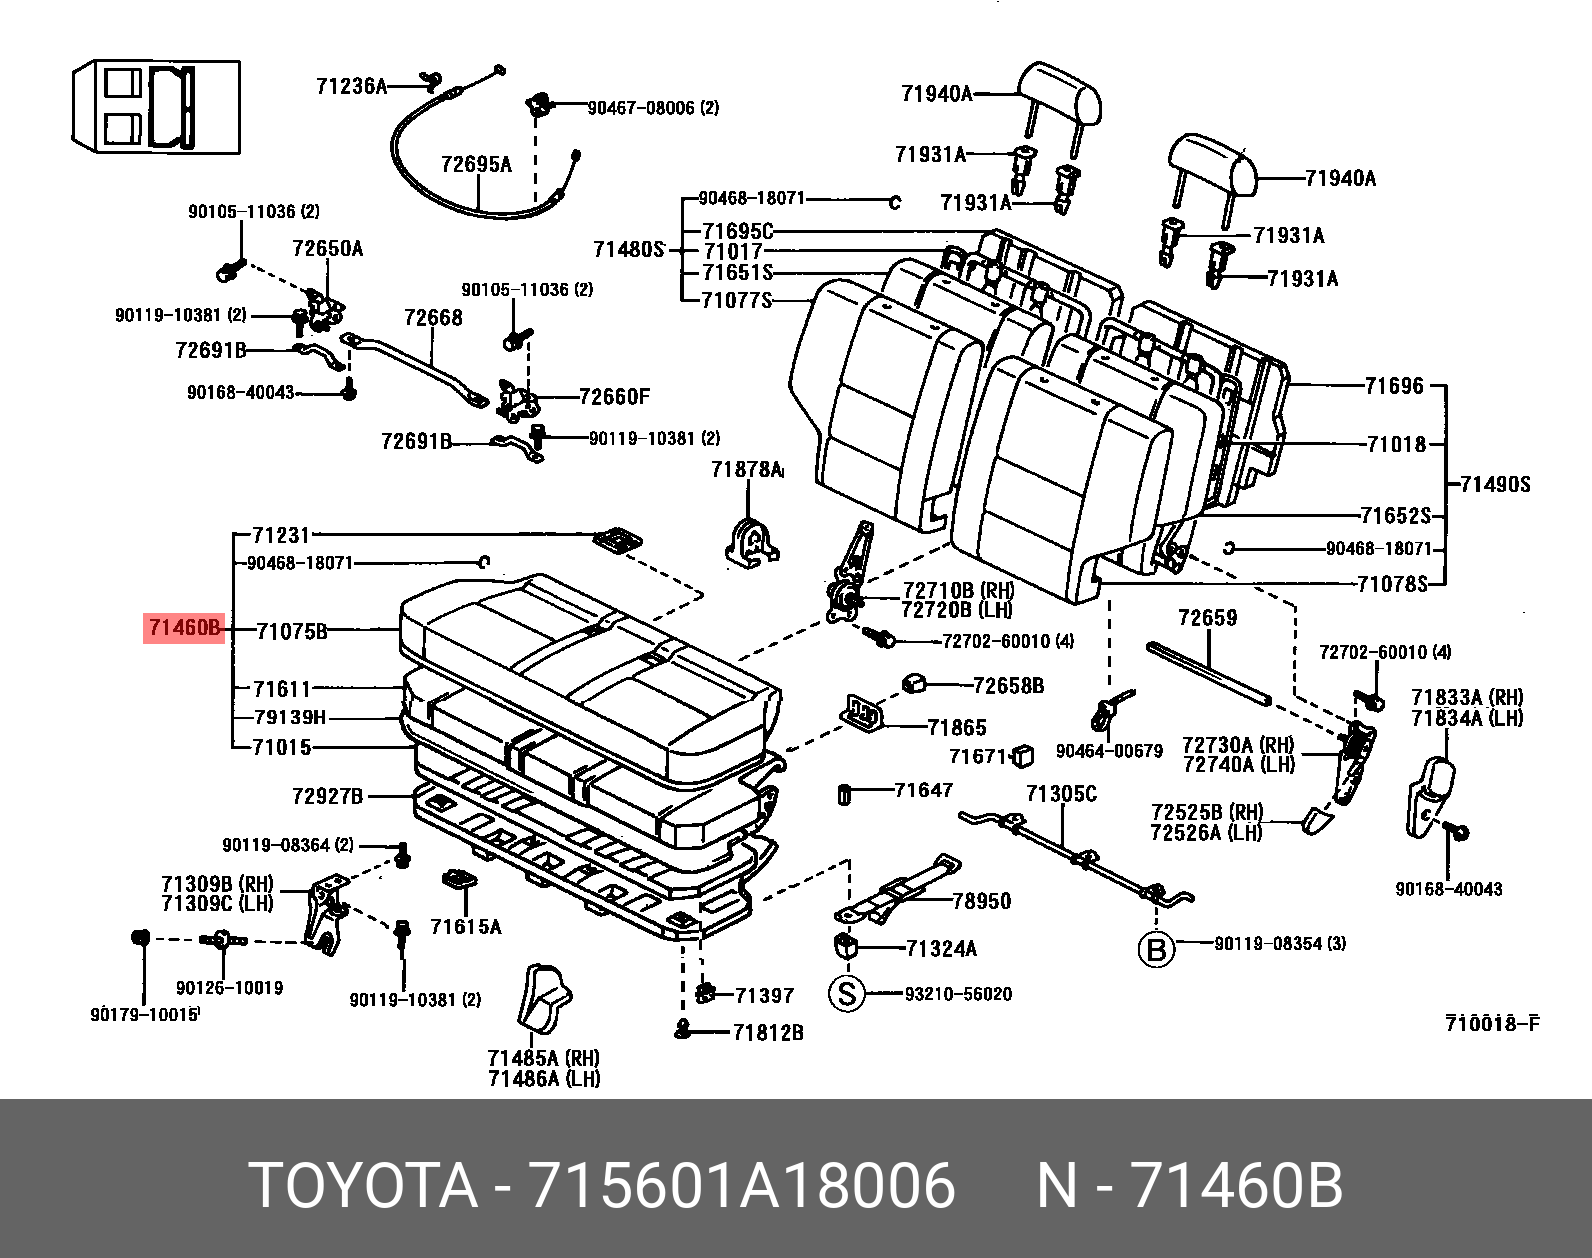 COROLLA 198305 - 198704, CUSHION ASSY, REAR SEAT (FOR BENCH TYPE)